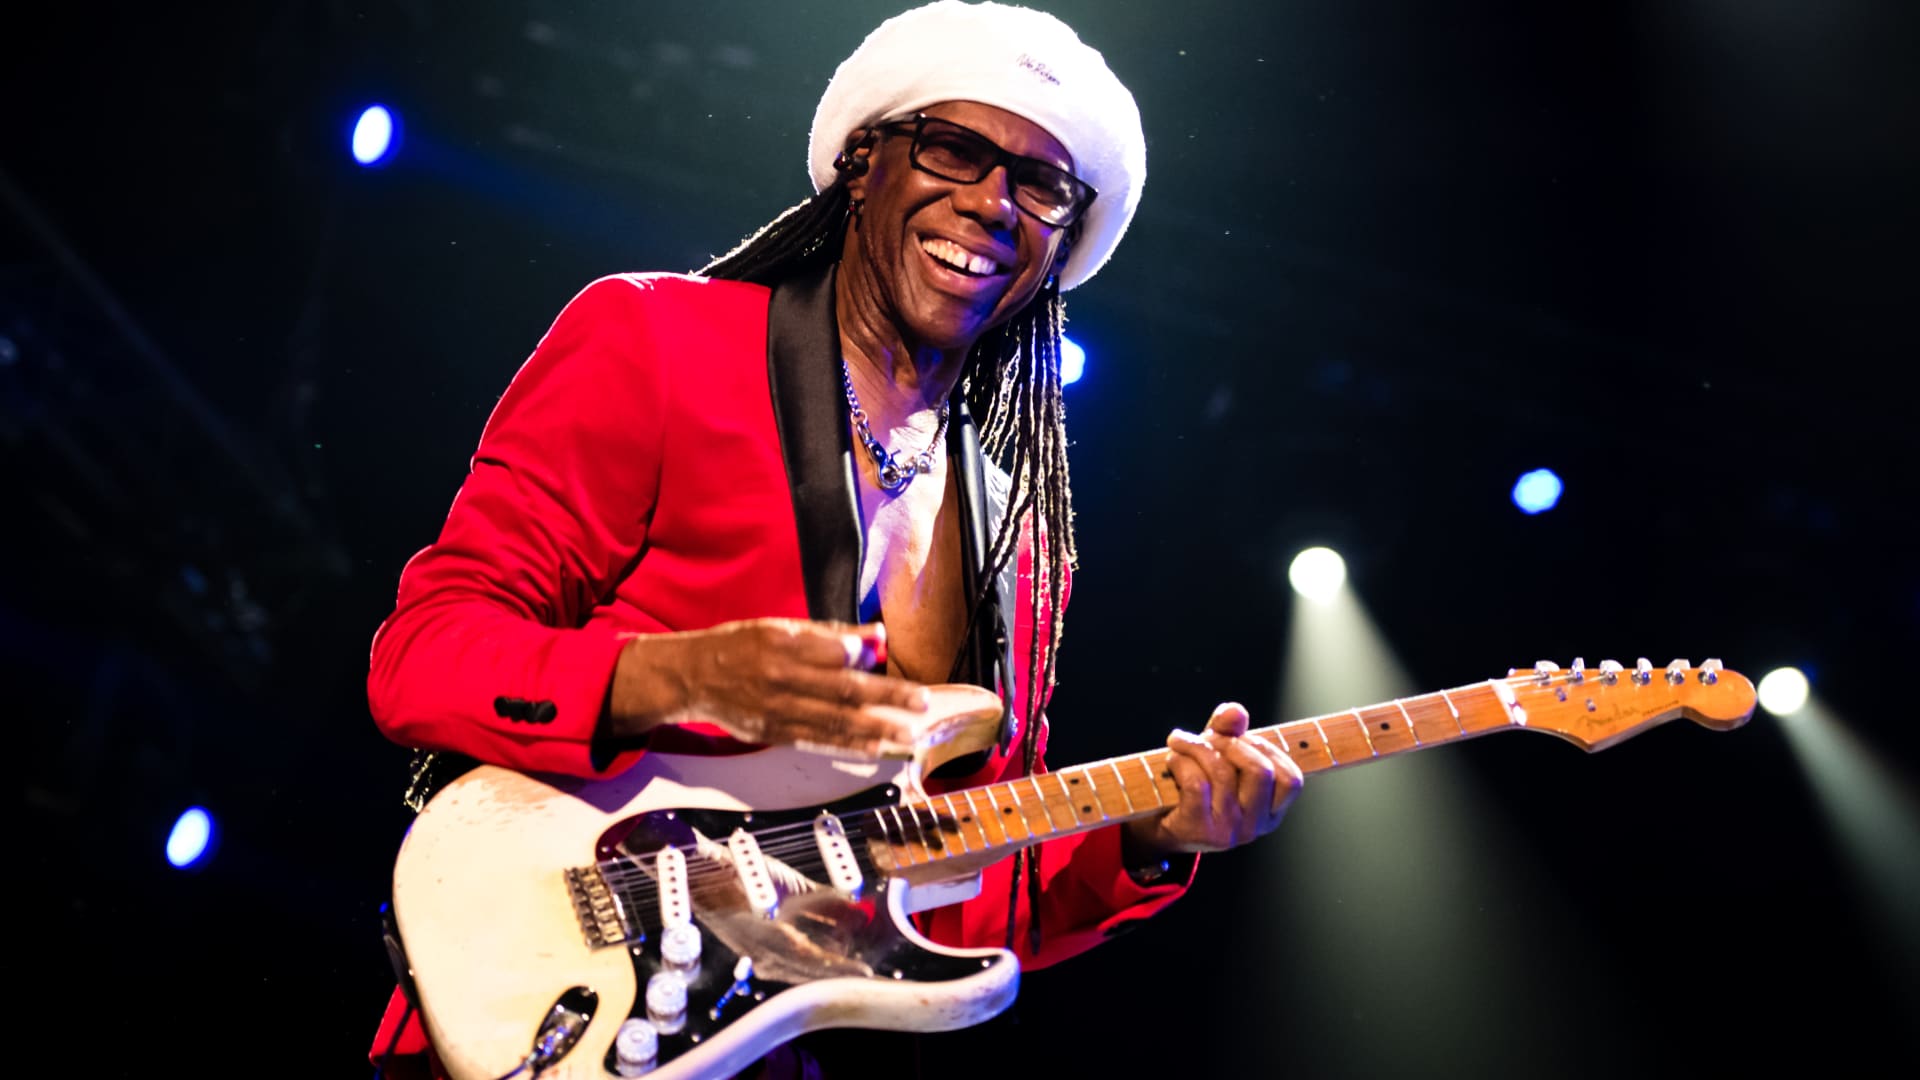 Nile Rodgers of Chic performs on stage at North Sea Jazz Festival at Ahoy on July 14, 2018 in Rotterdam, Netherlands. 